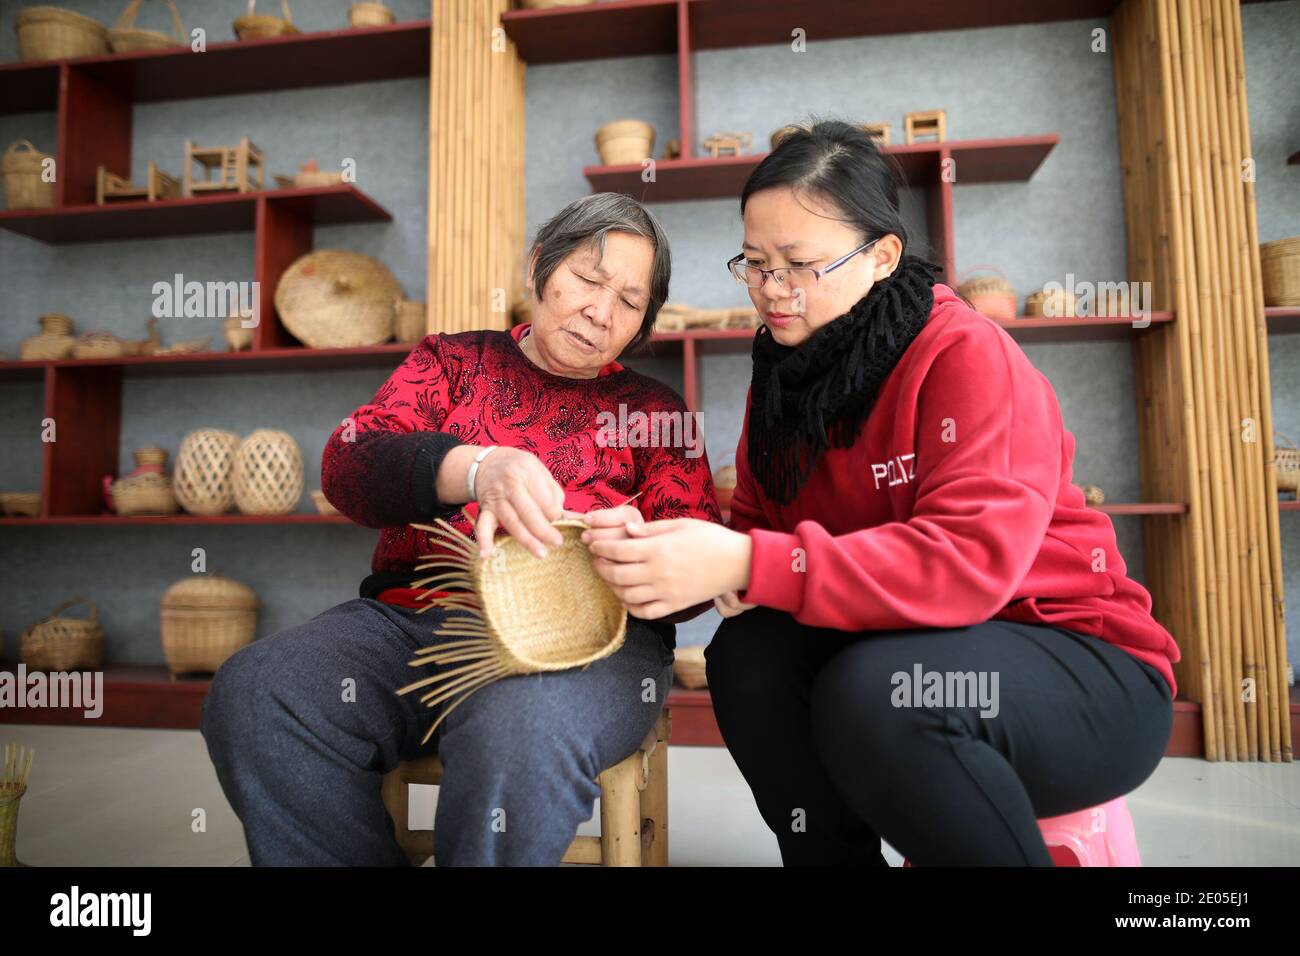 Gan Huiling is representative inheritor of municipal intangible cultural heritage project of bamboo weaving with 57 years experience in Foshan City, s Stock Photo